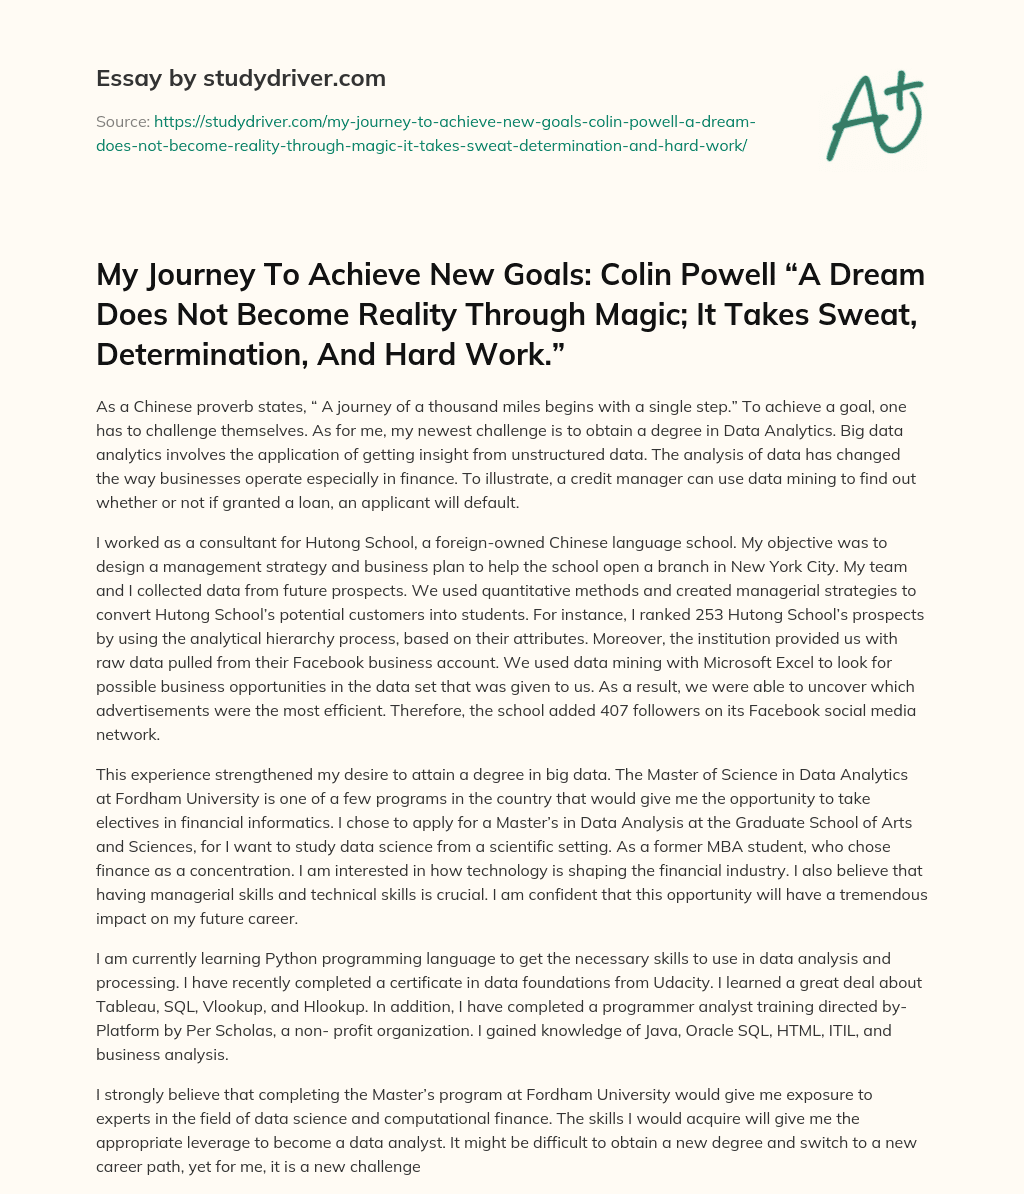 My Journey to Achieve New Goals: Colin Powell “A Dream does not Become Reality through Magic; it Takes Sweat, Determination, and Hard Work.” essay